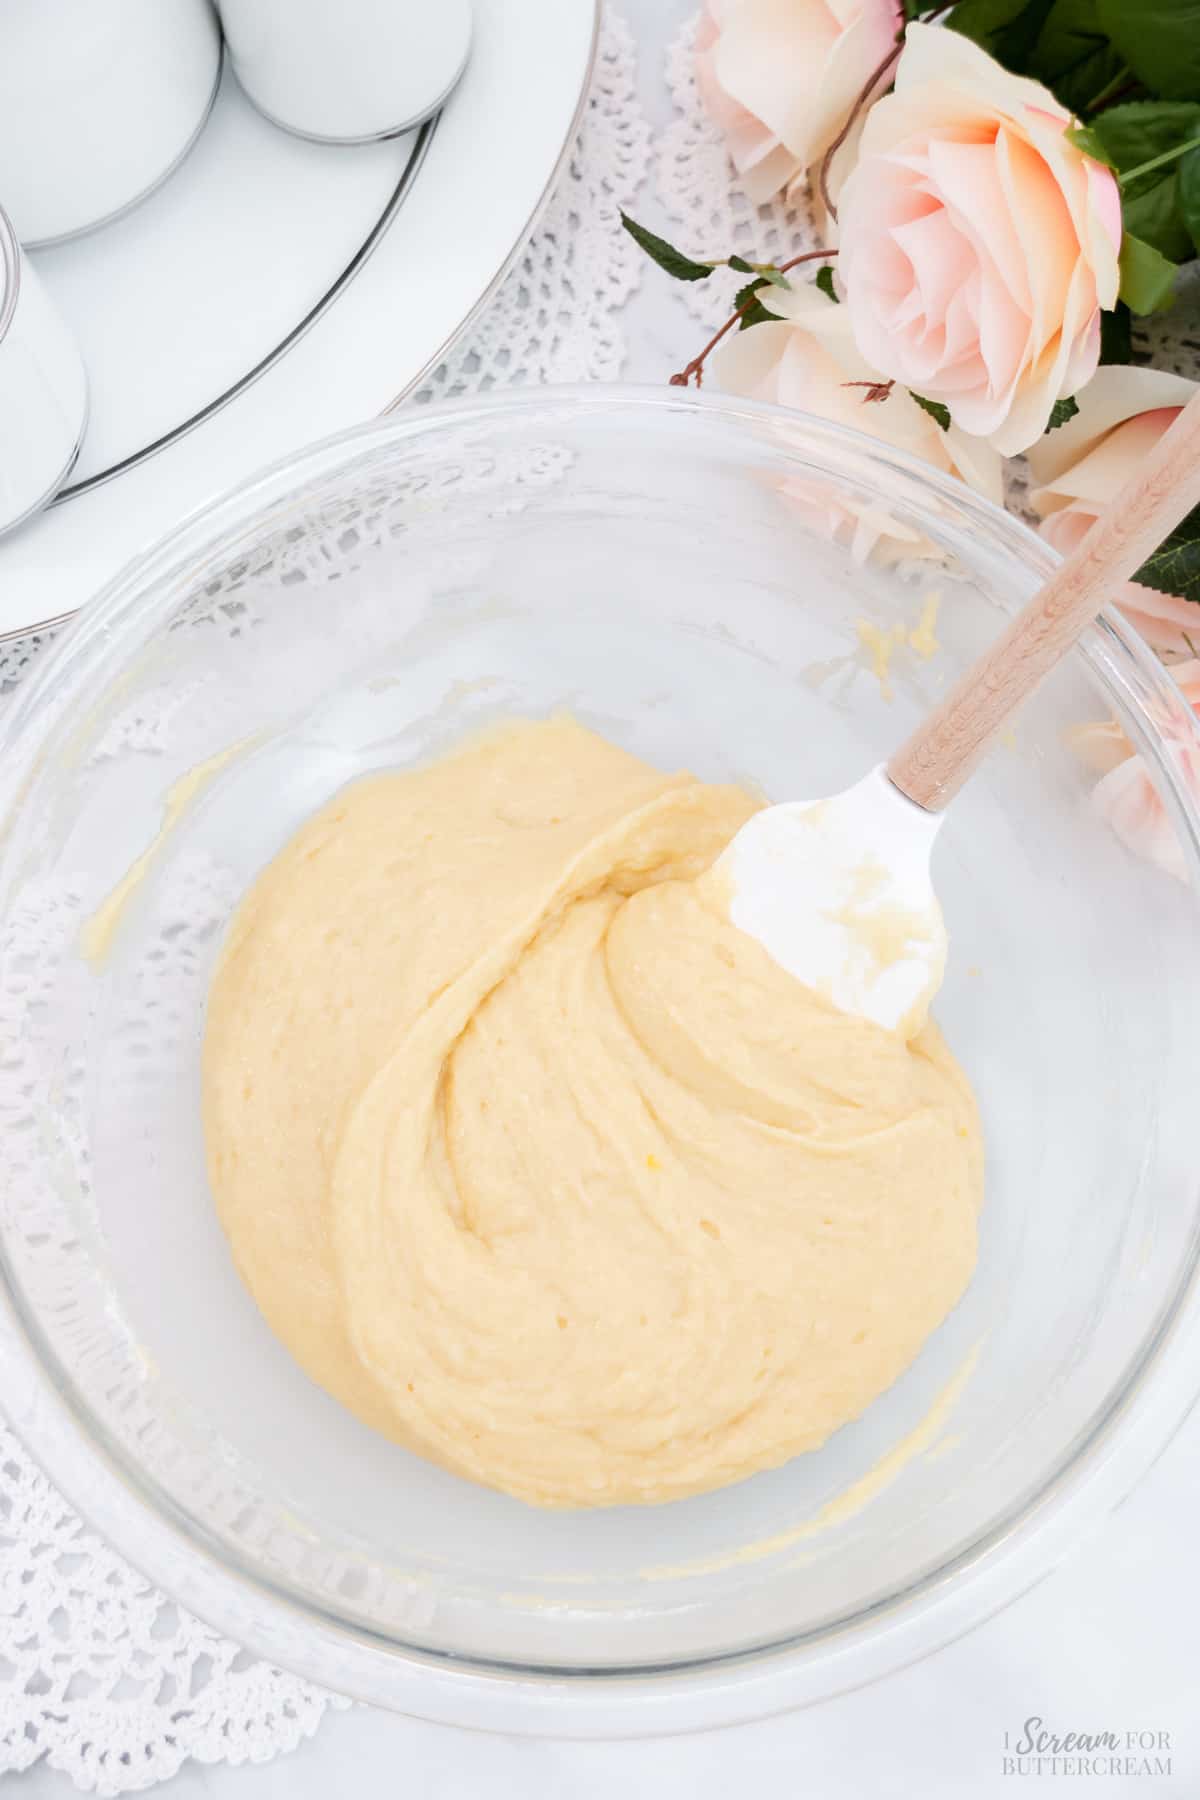 Mixed vanilla cake batter in a mixing bowl with a spatula.